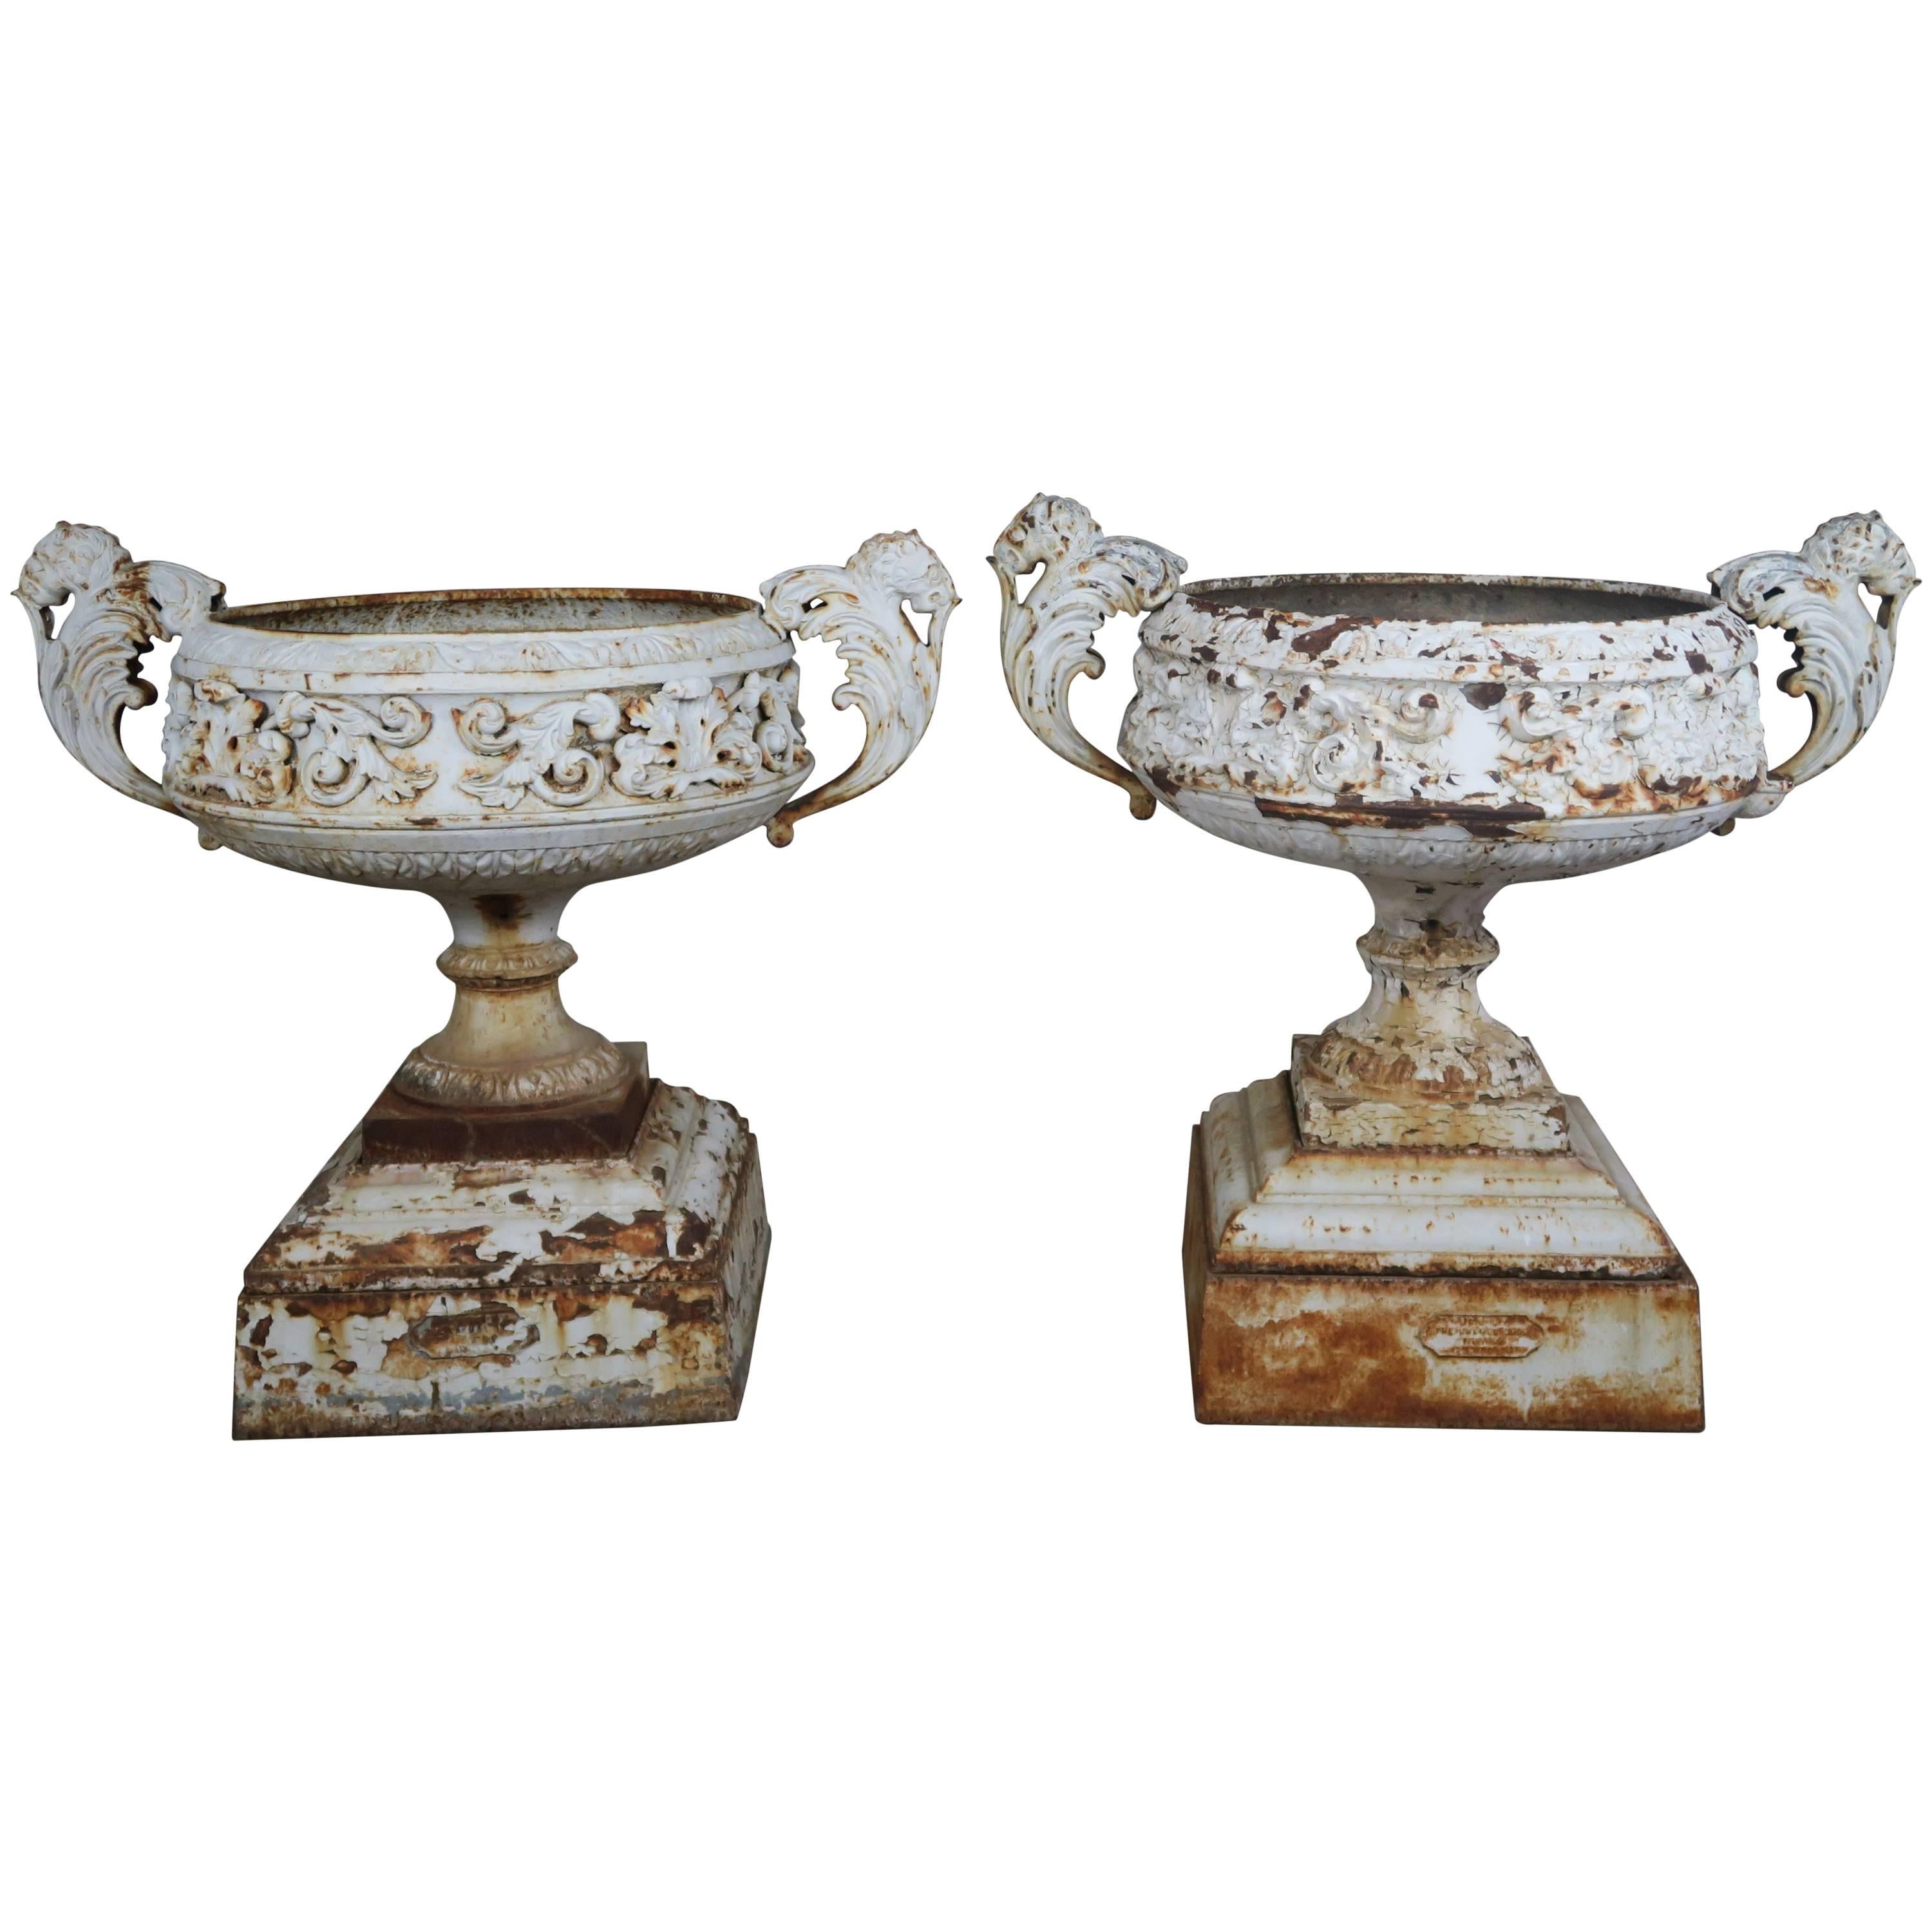 19th Century French Painted Cast Iron Garden Urns, Pair